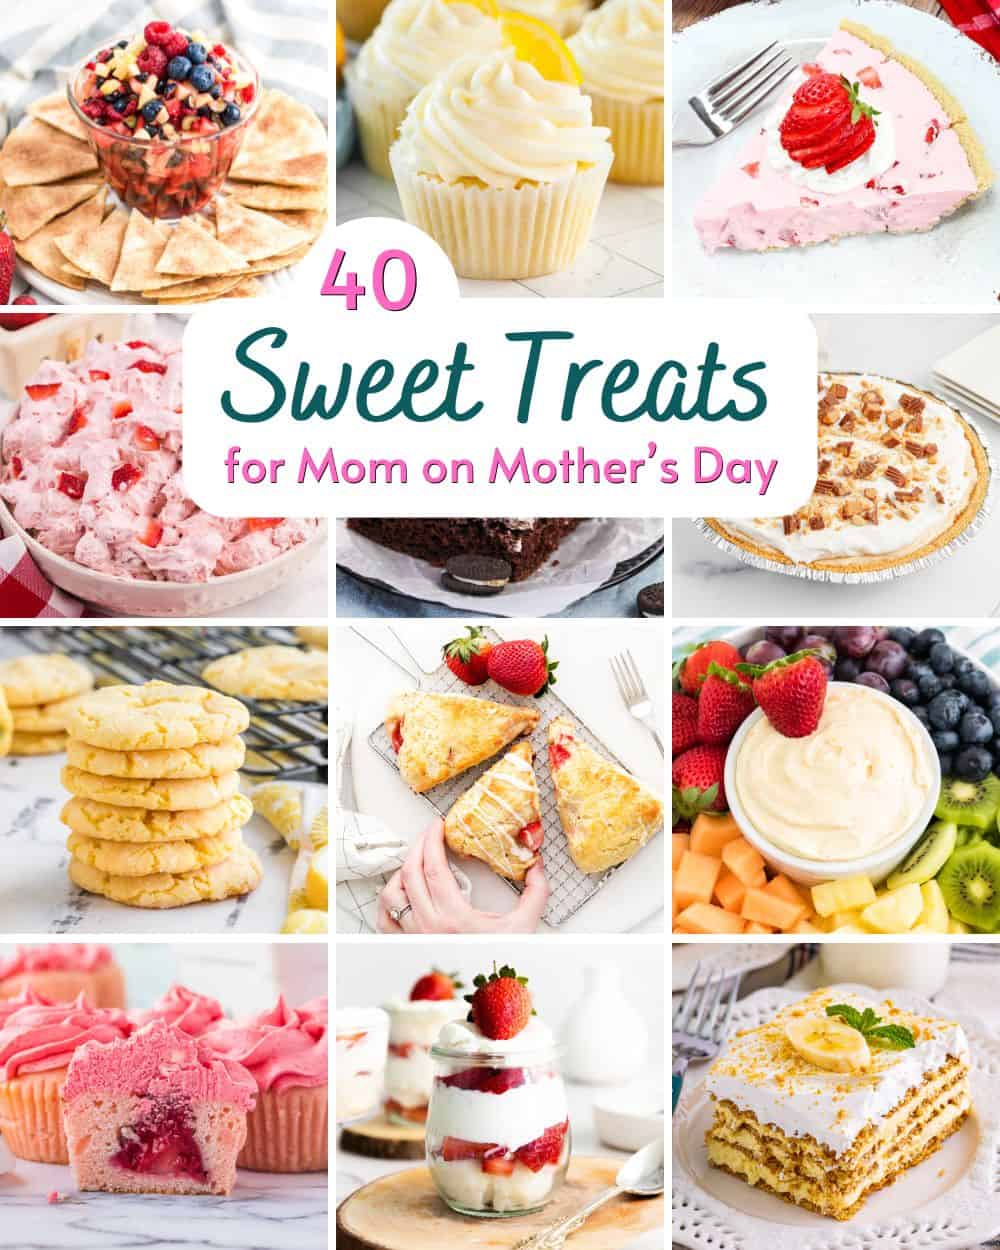 40 Sweet Treats for Mom on Mother's Day.